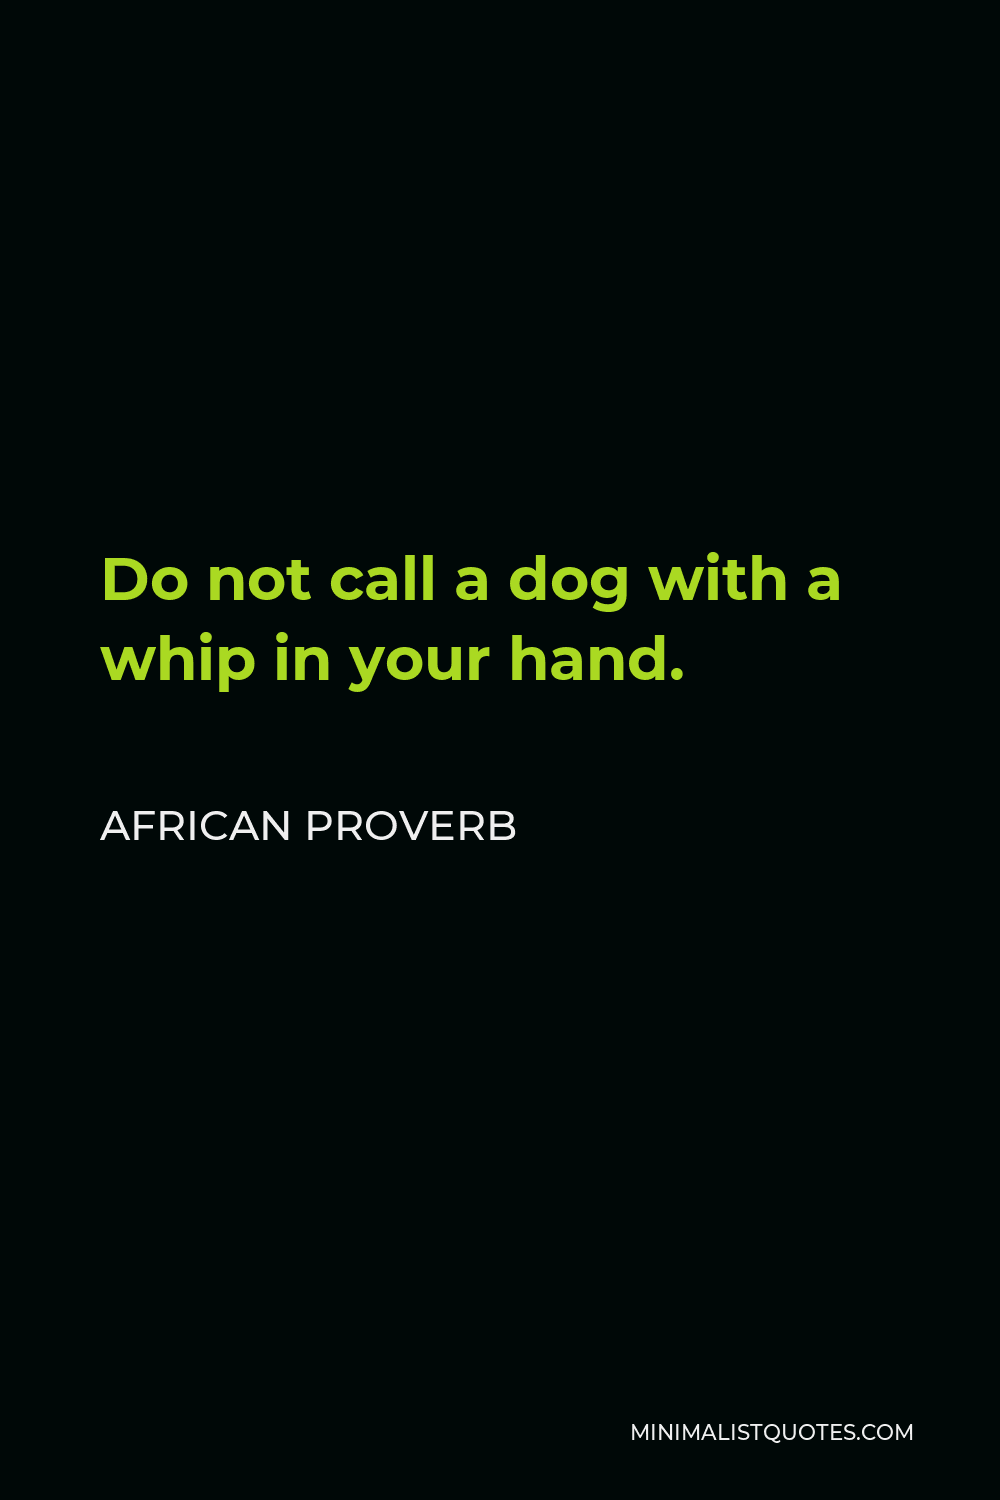 African Proverb Quote - Do not call a dog with a whip in your hand.